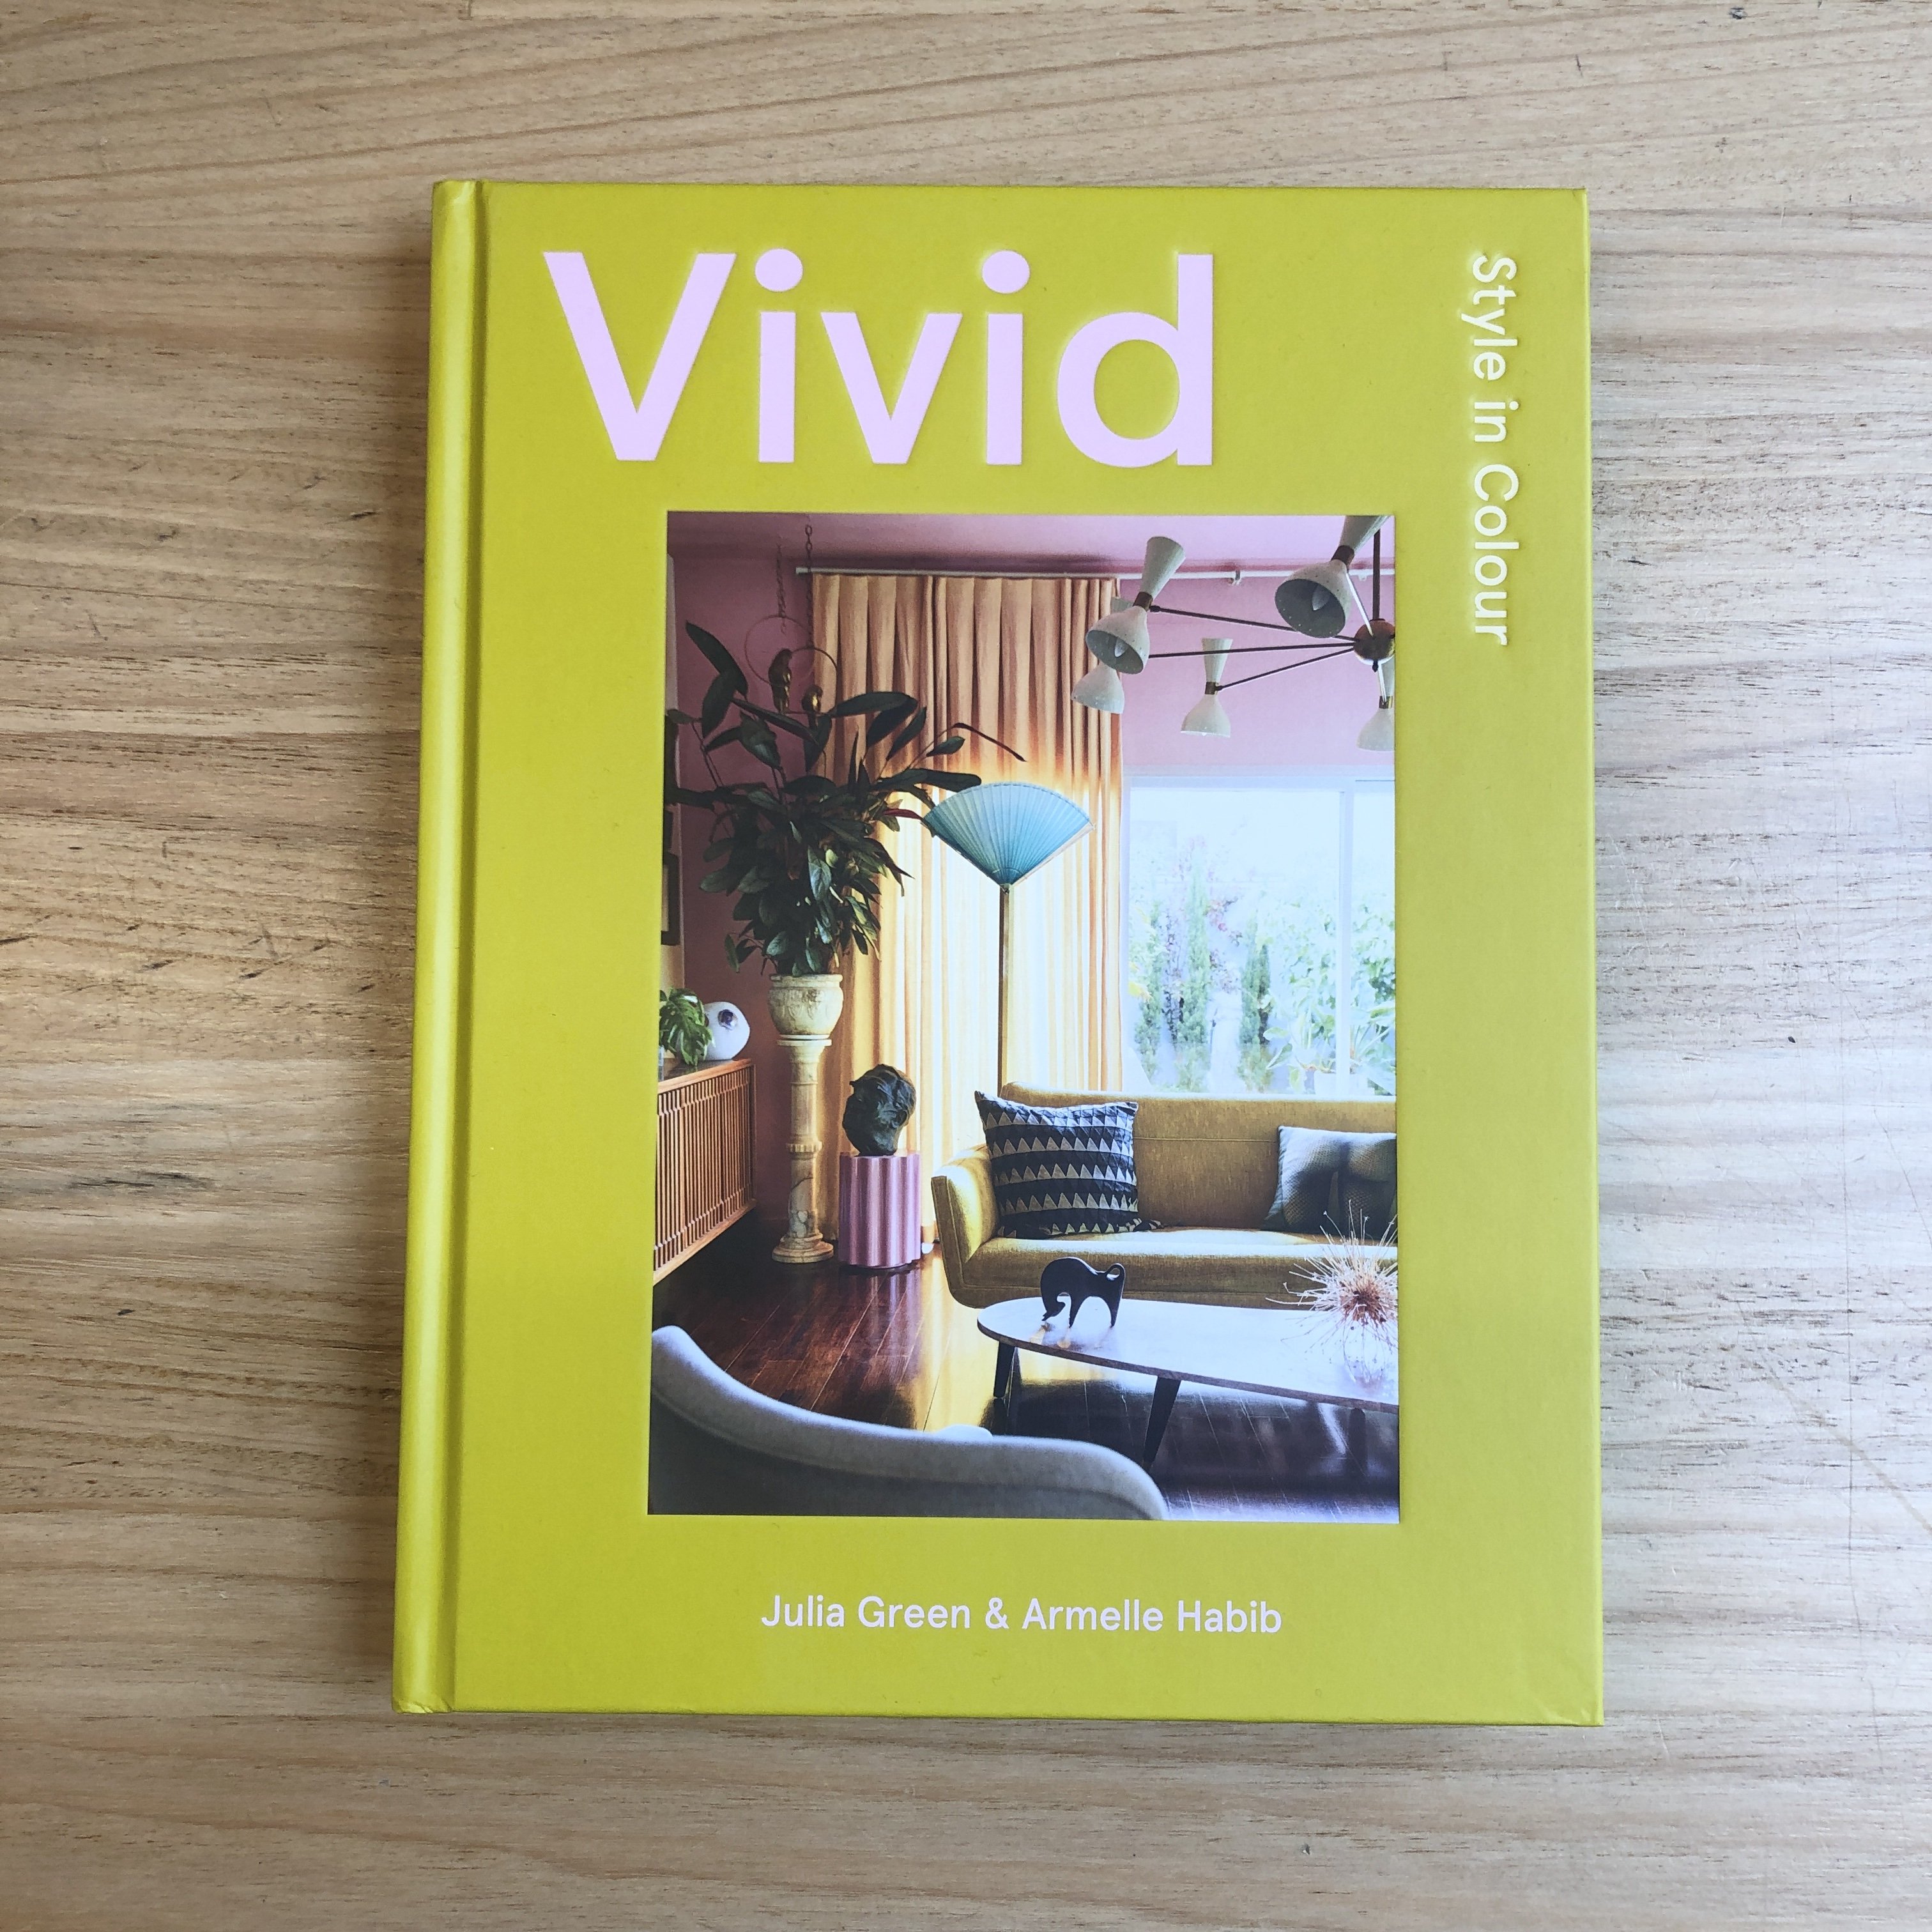 Vivid: Style in Colour